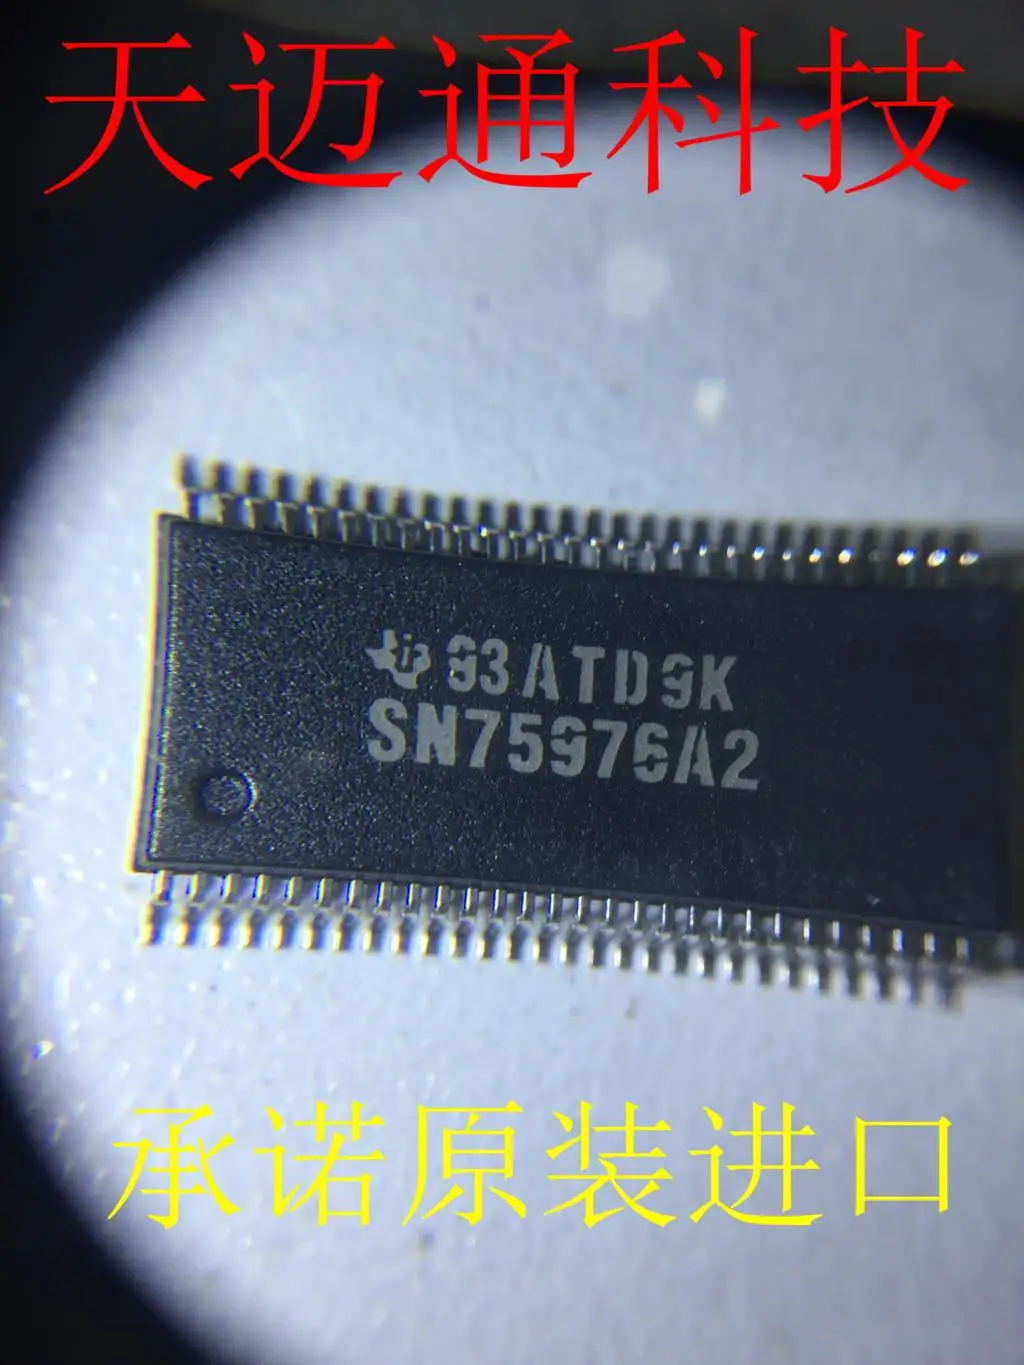 SN75976A2DLR SN75976A2 SSOP56 RS-485 / RS-422 transceiver interface chip